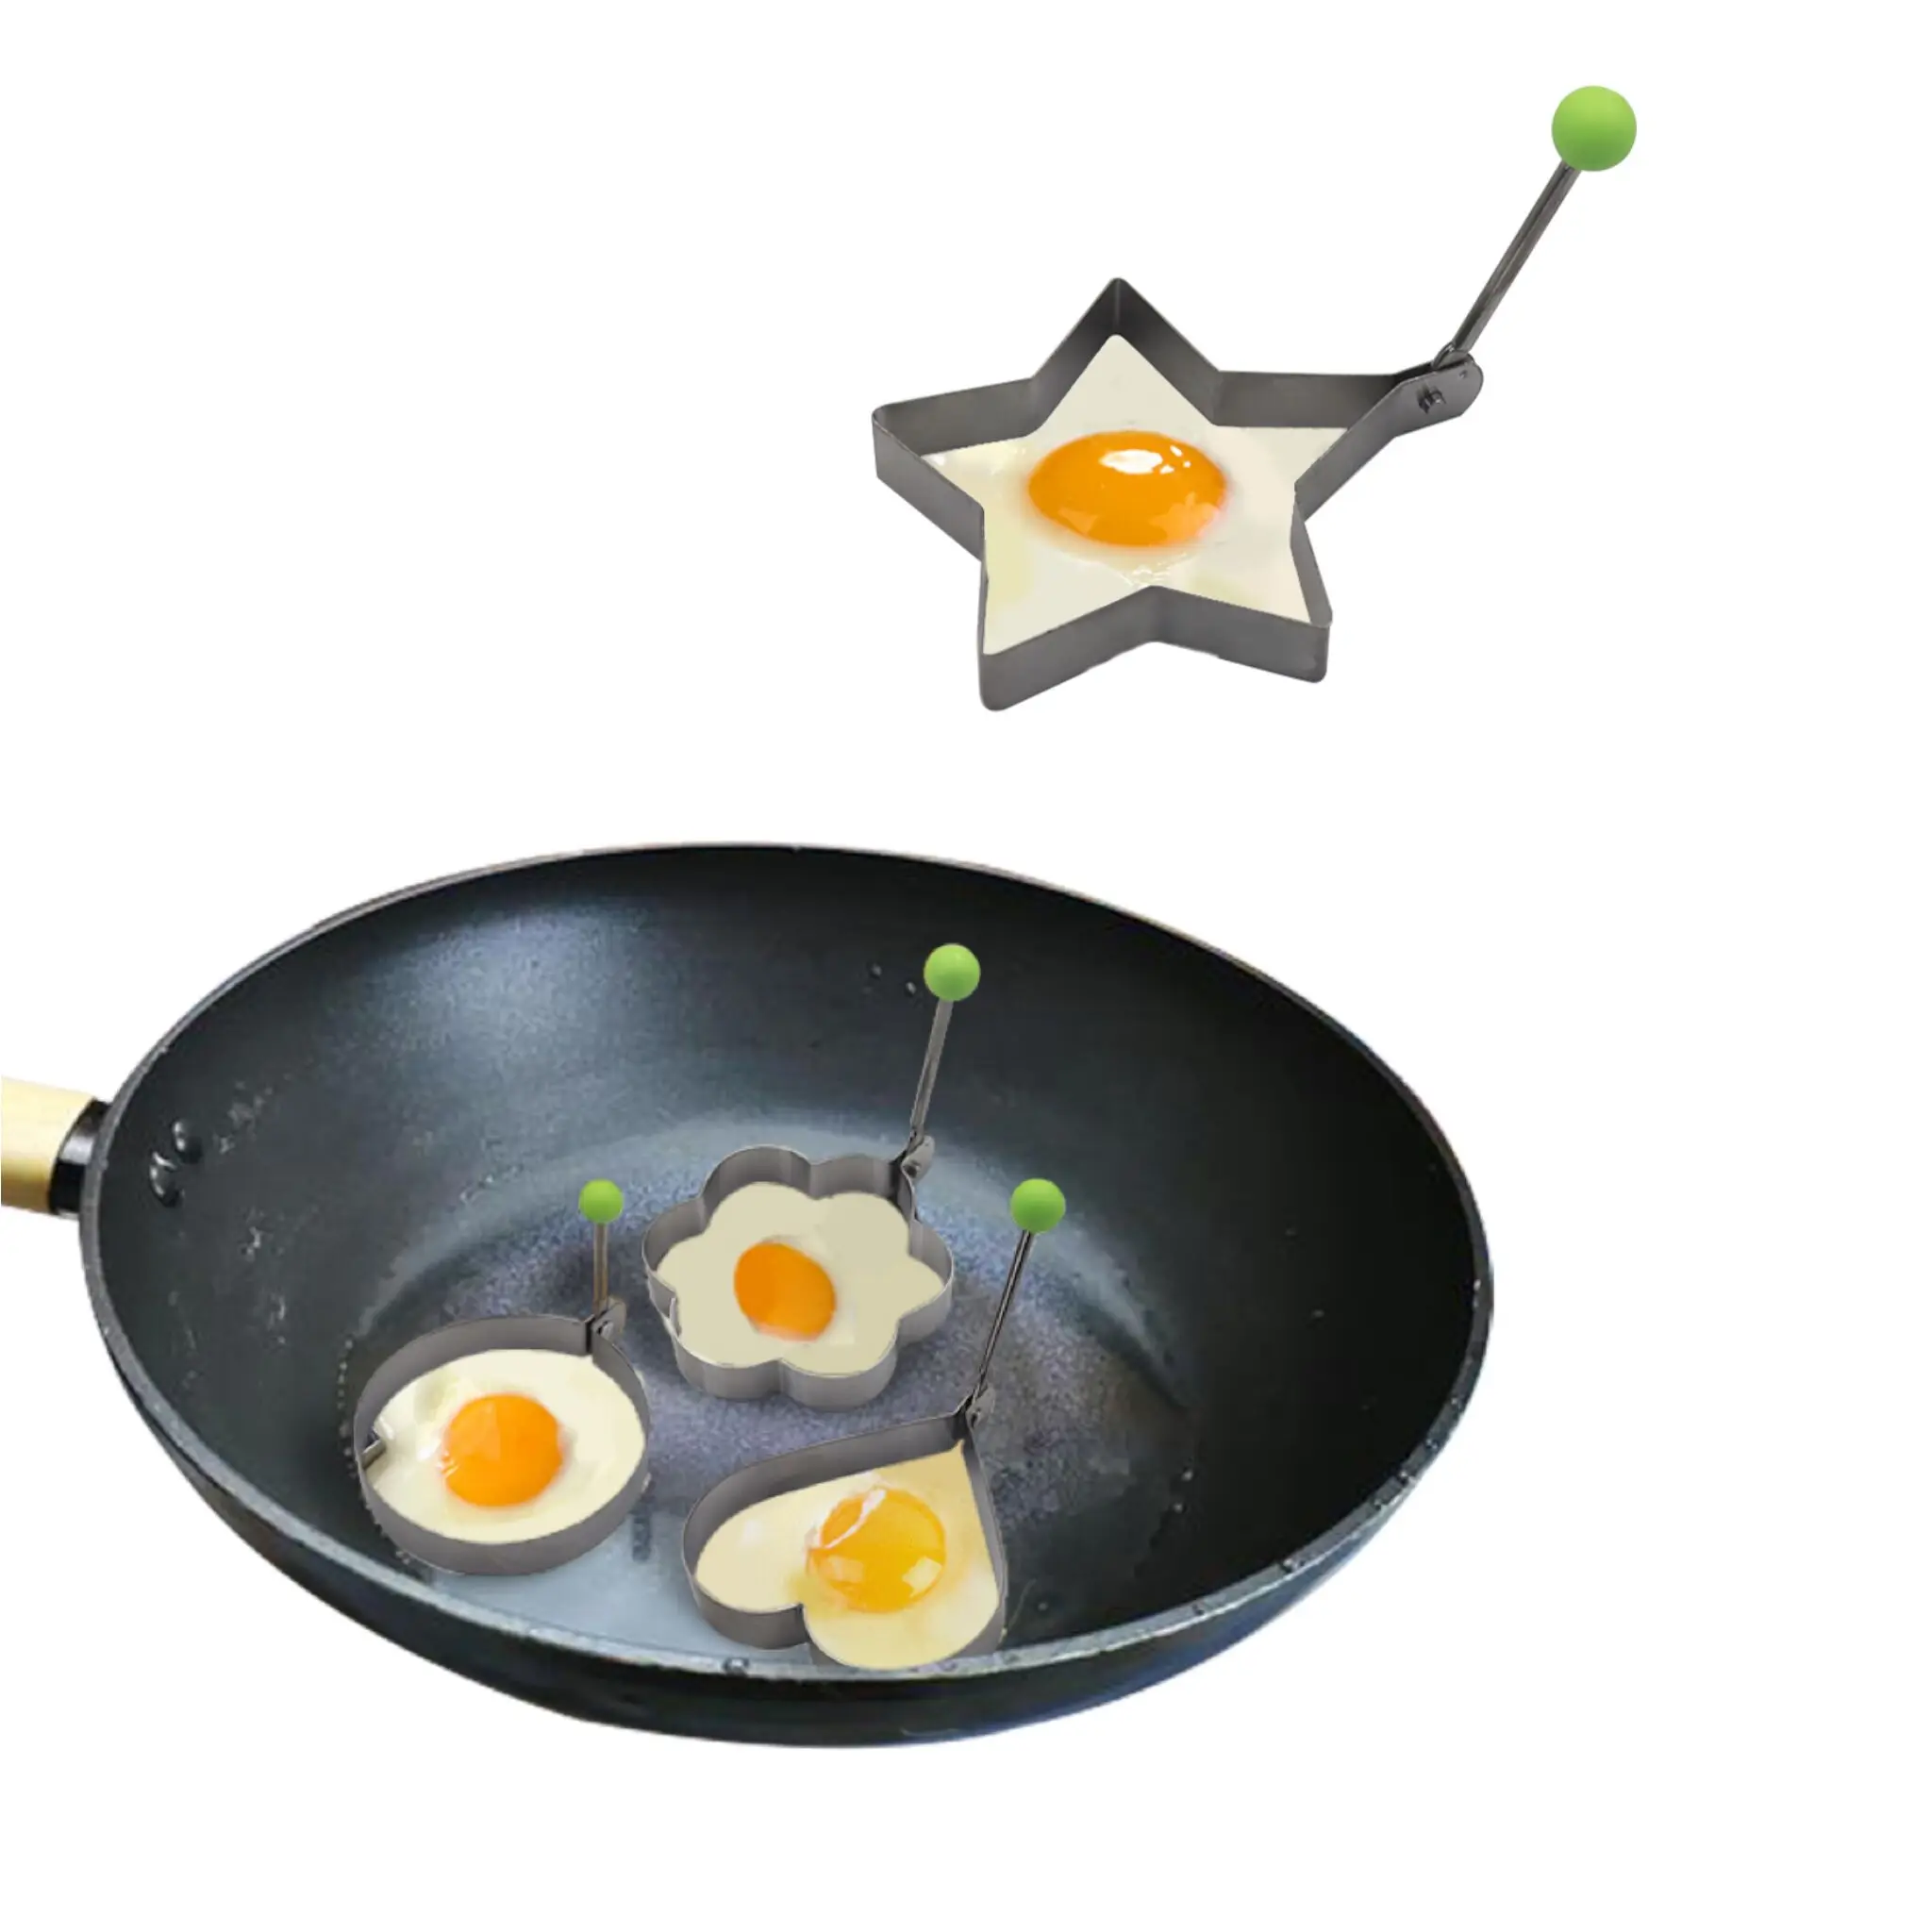 

Stainless Steel Egg Mold Pancake Rings Fried Egg Mould Shaper Kitchen Cooking Tools Kitchen Accessories Gadgets